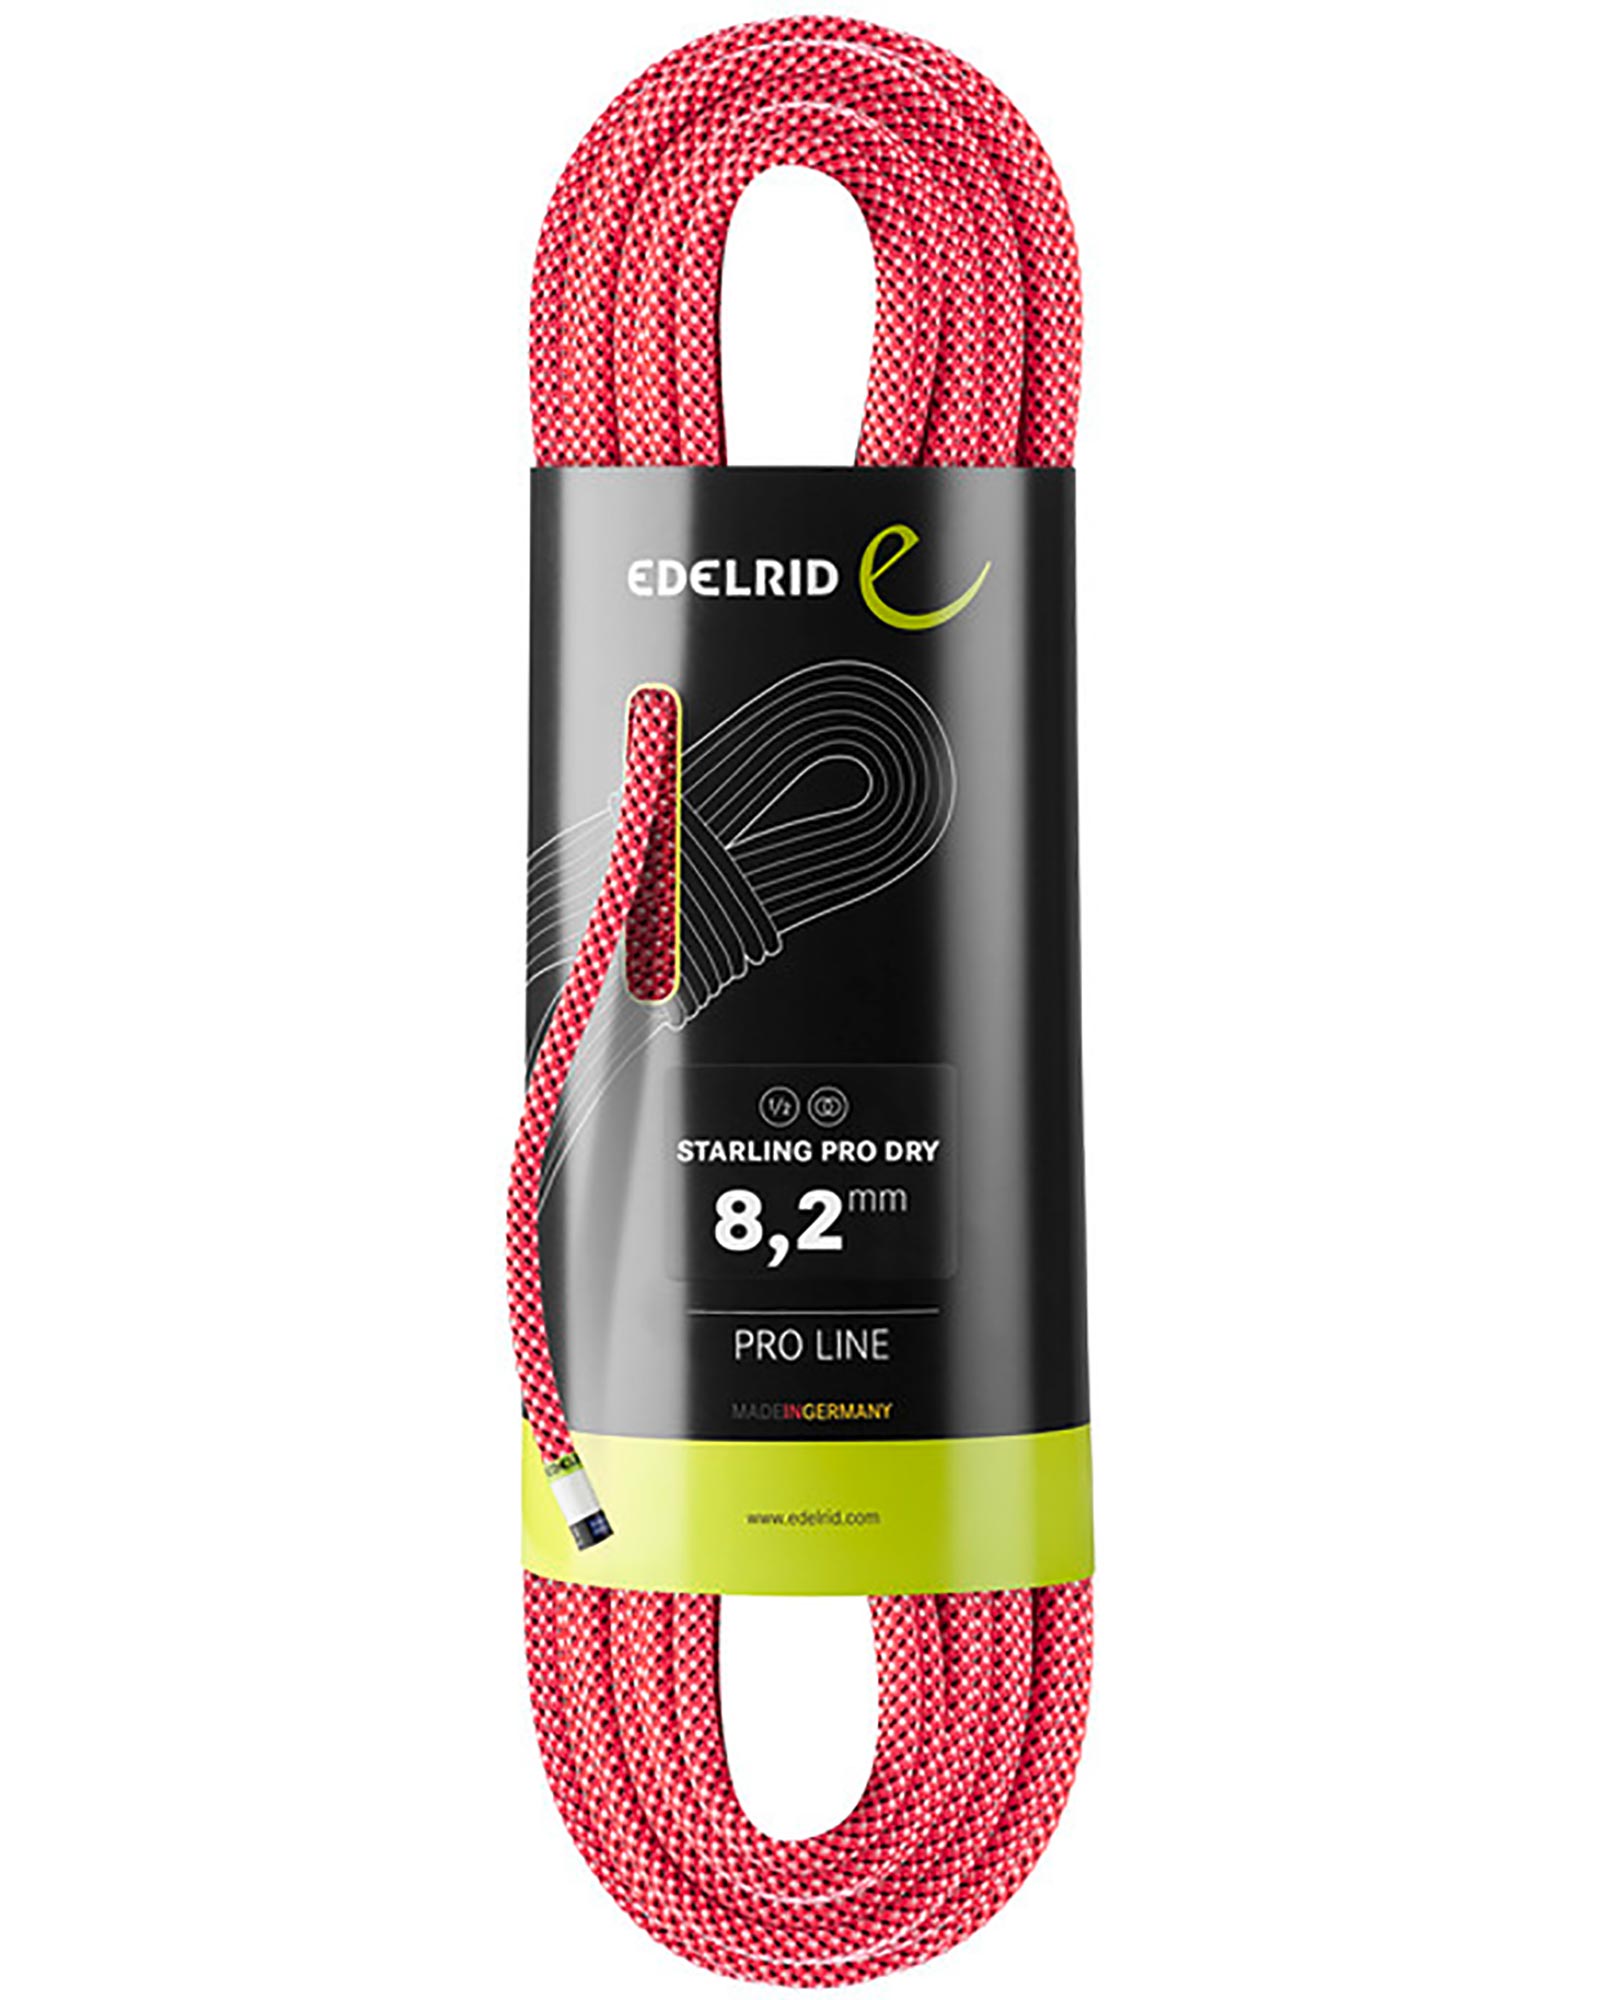 Edelrid Starling Pro Dry 8.2mm x 50m Rope - Pink 50m